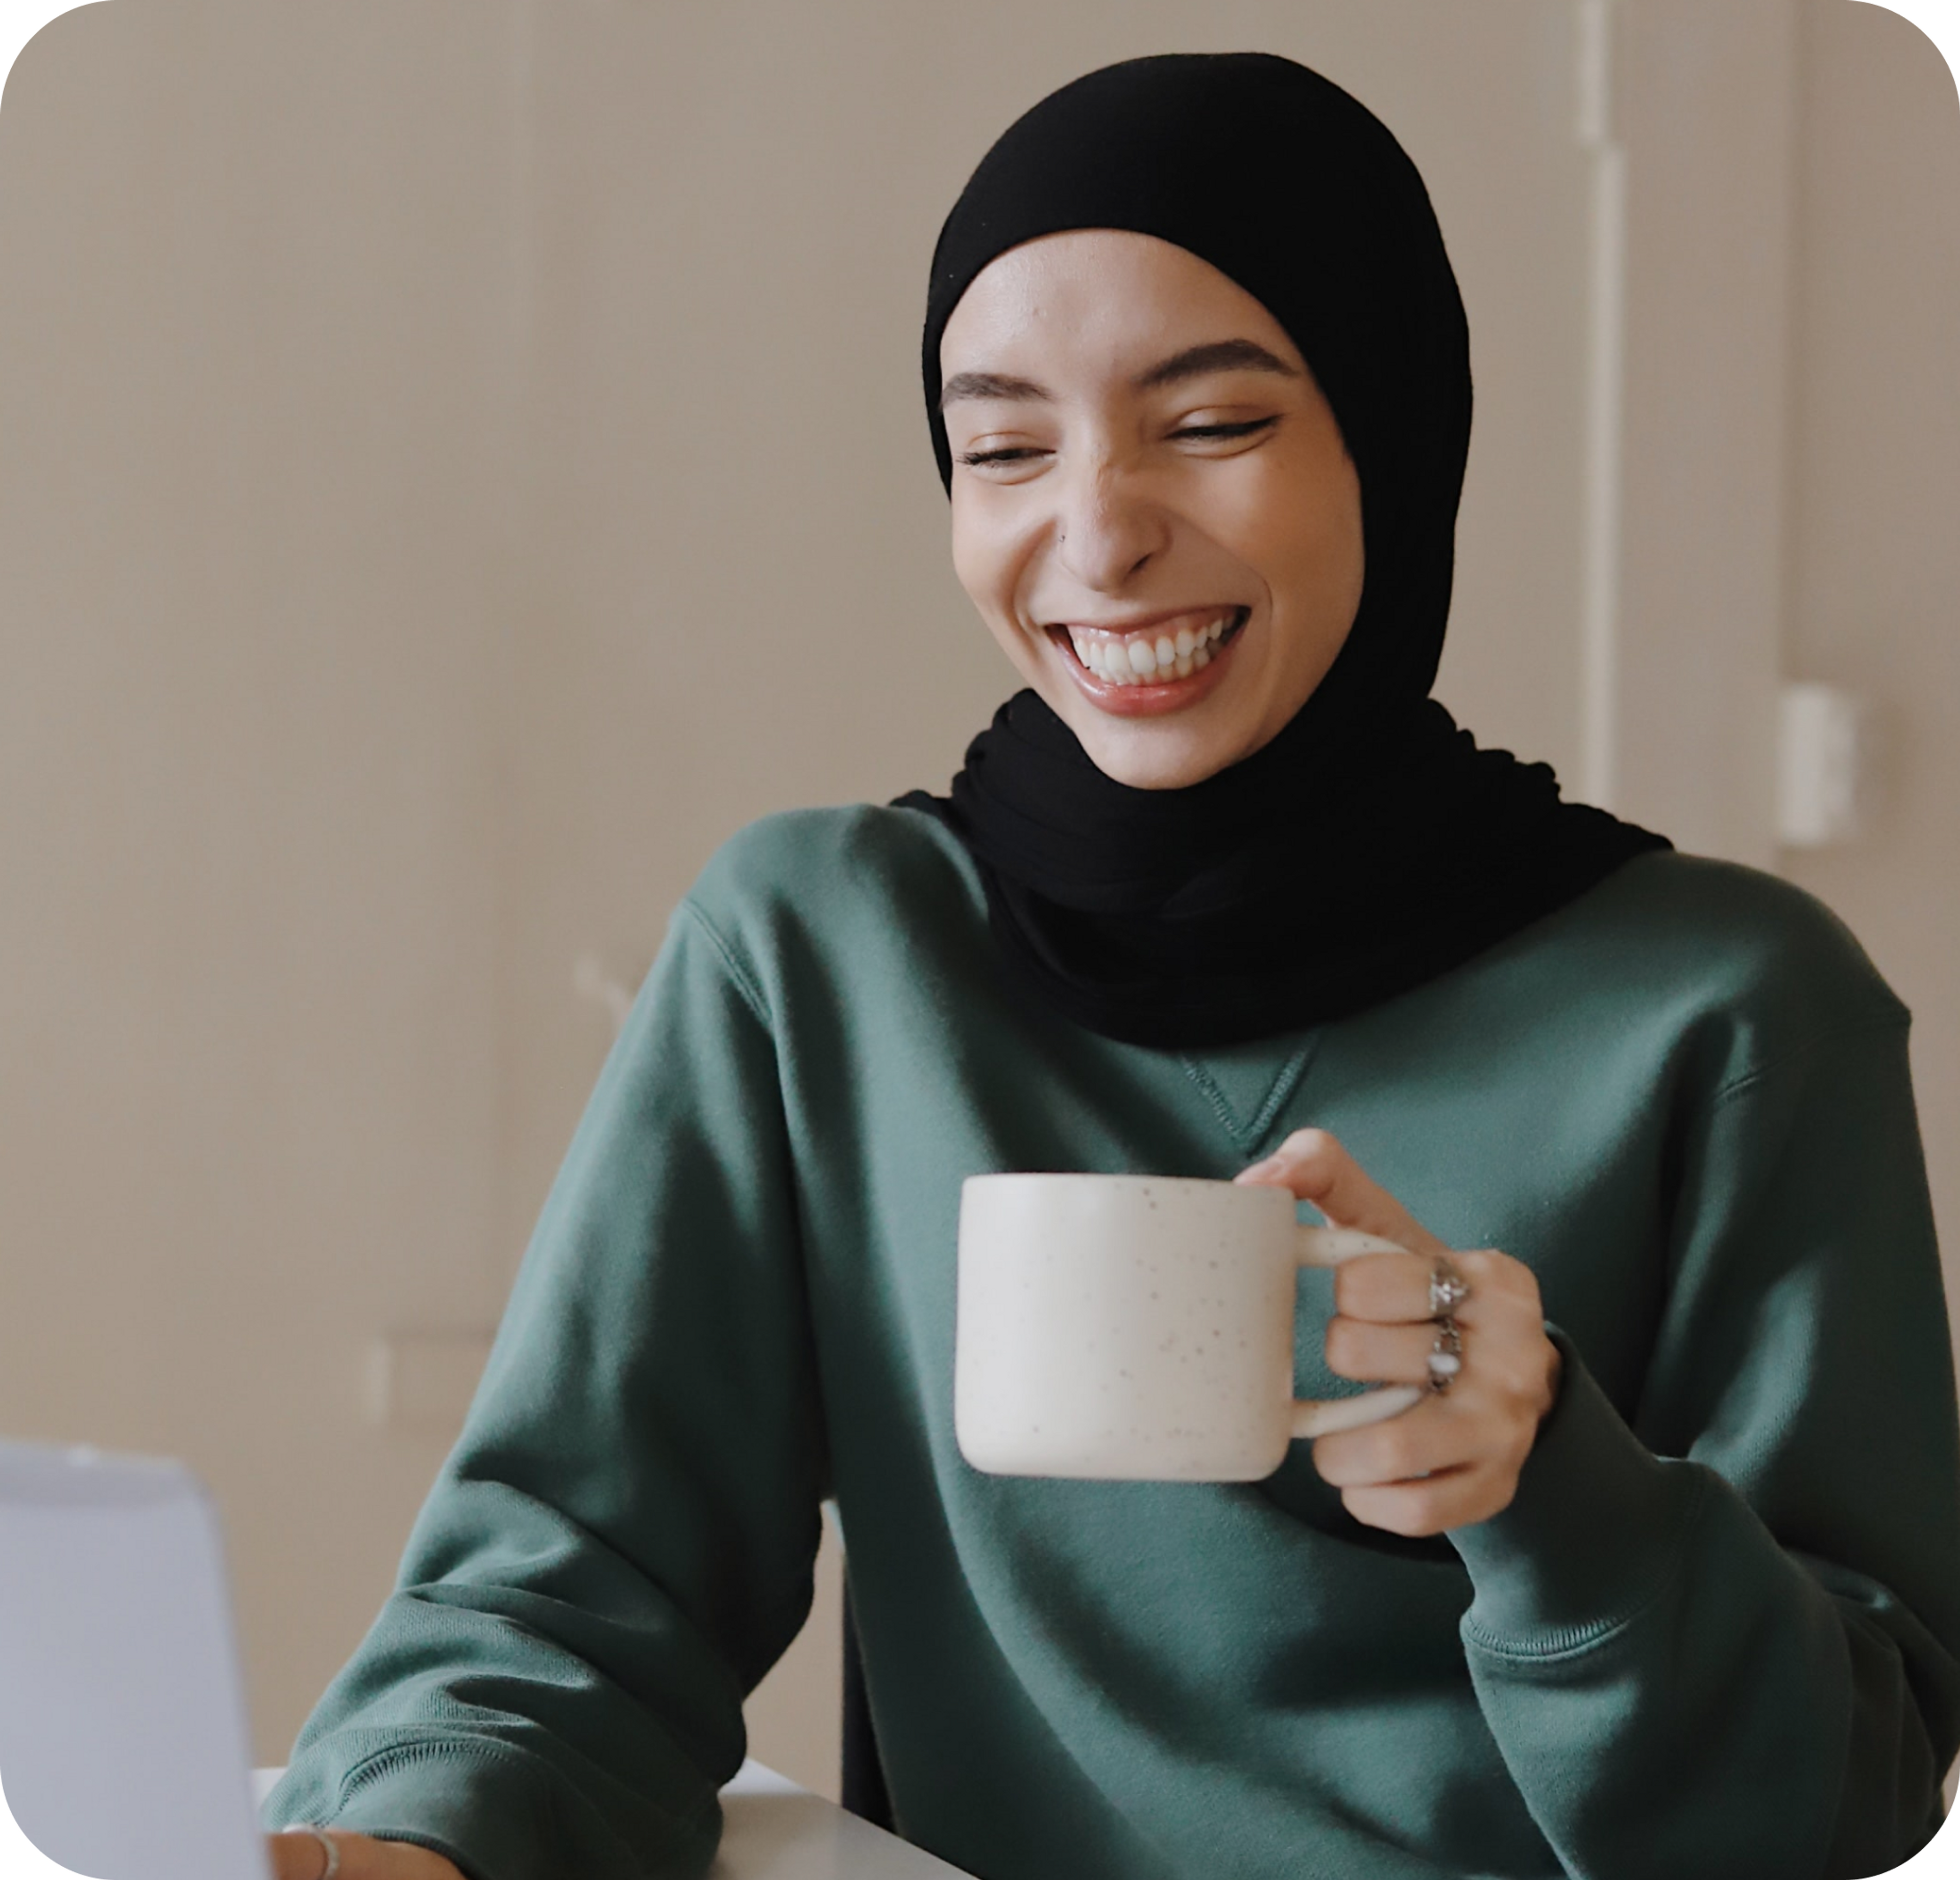 A photo of a woman smiling while holding a mug and looking at a laptop